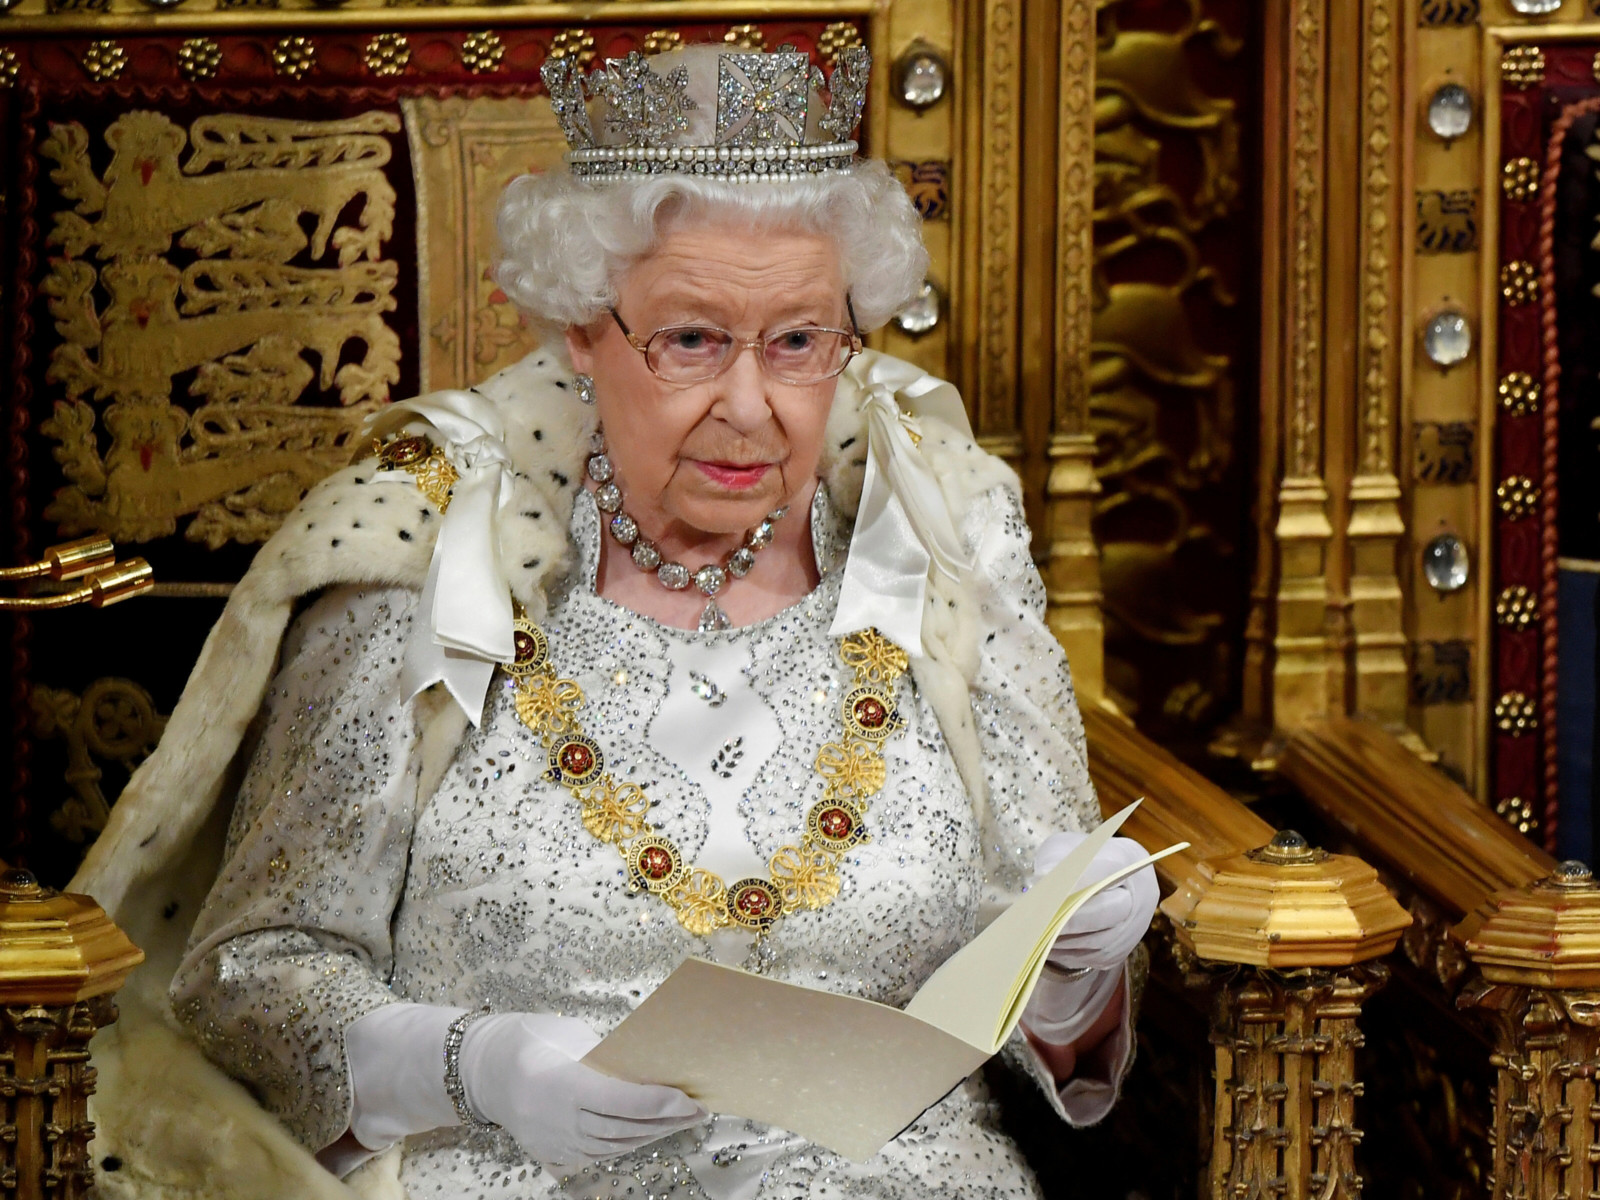  The queen will give her first televised address outside of her Christmas speech since 2002